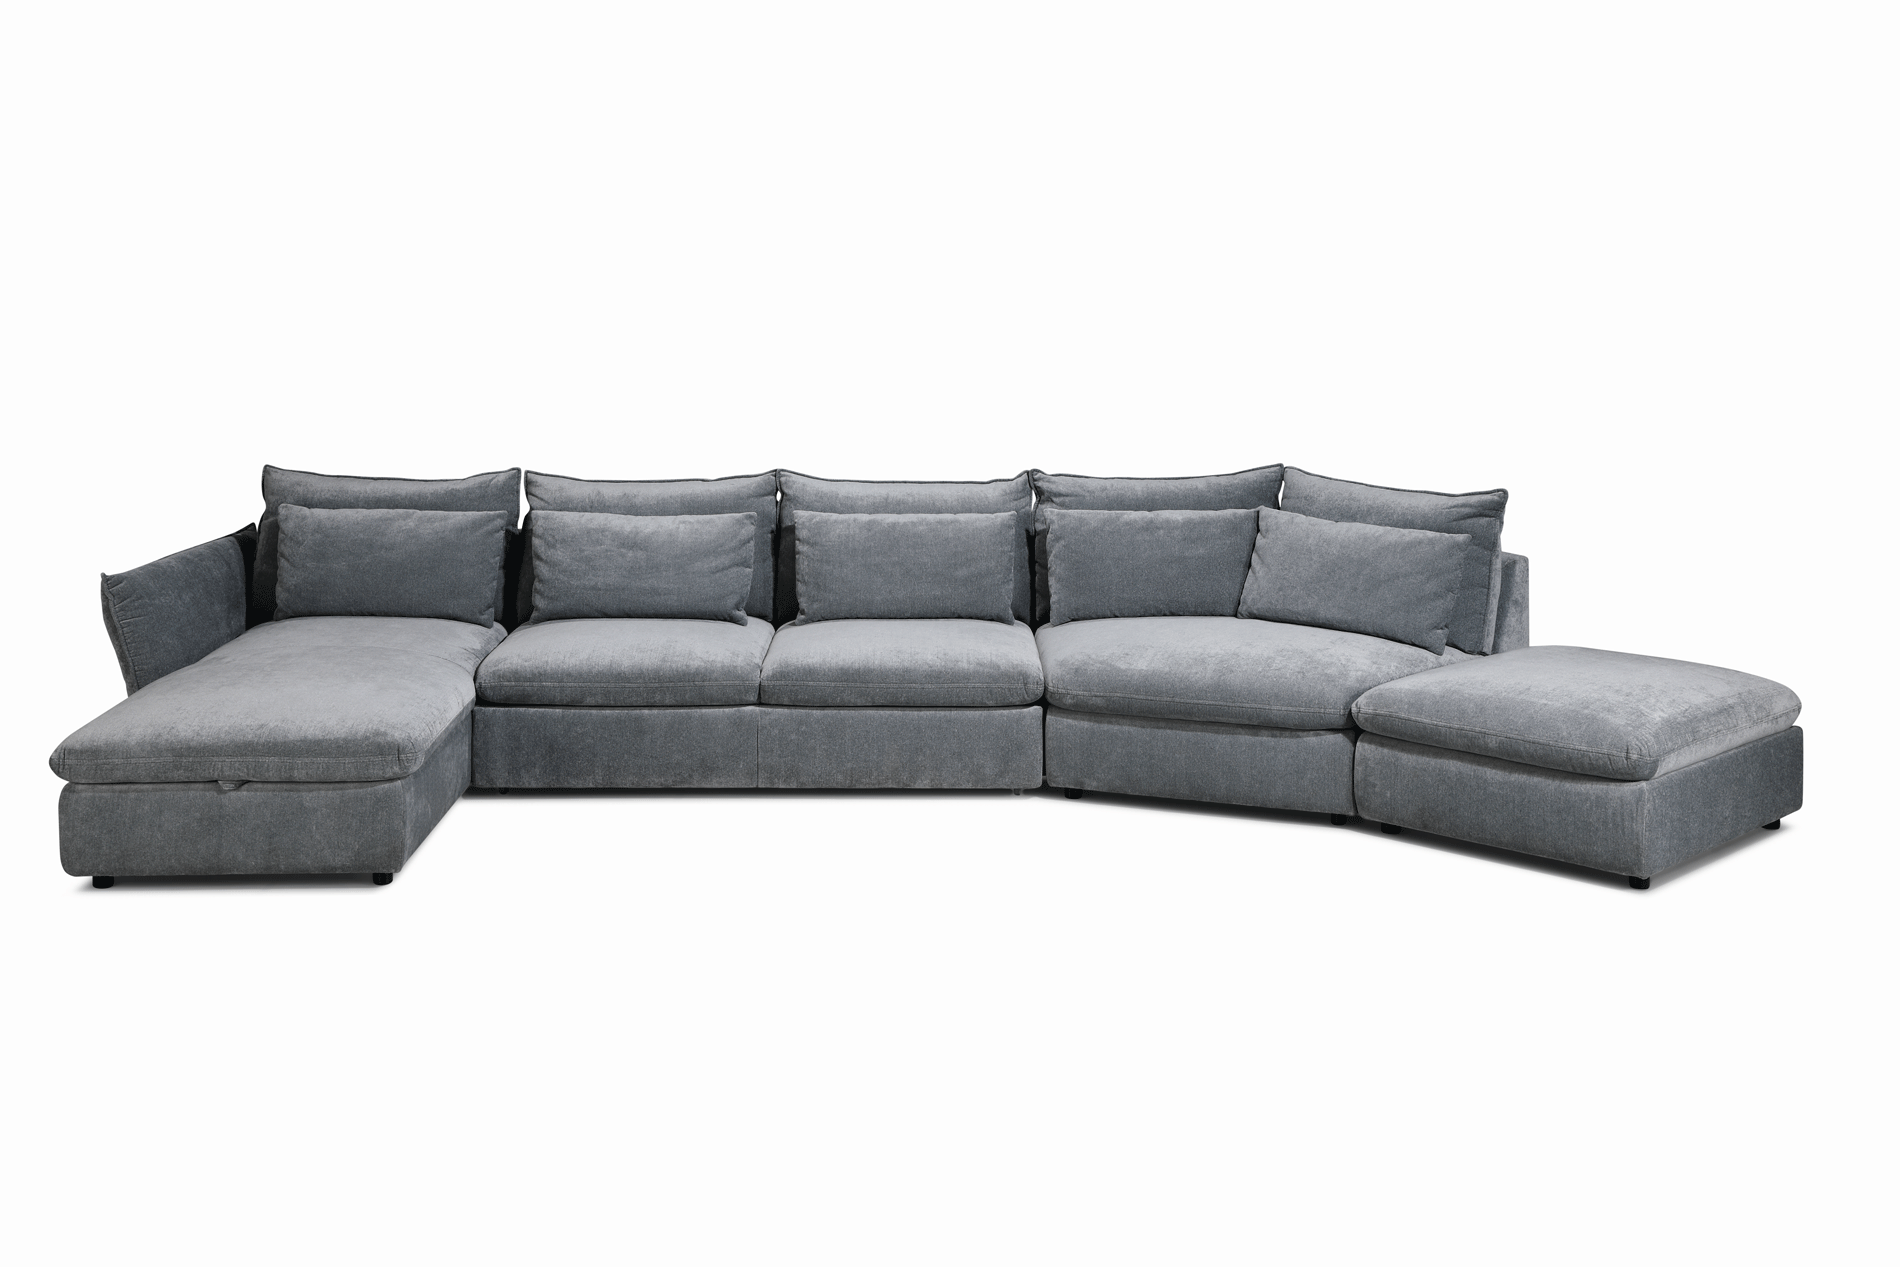 Brands Suinta Modern Collection, Spain Idylla Sectional w/ Bed & storage